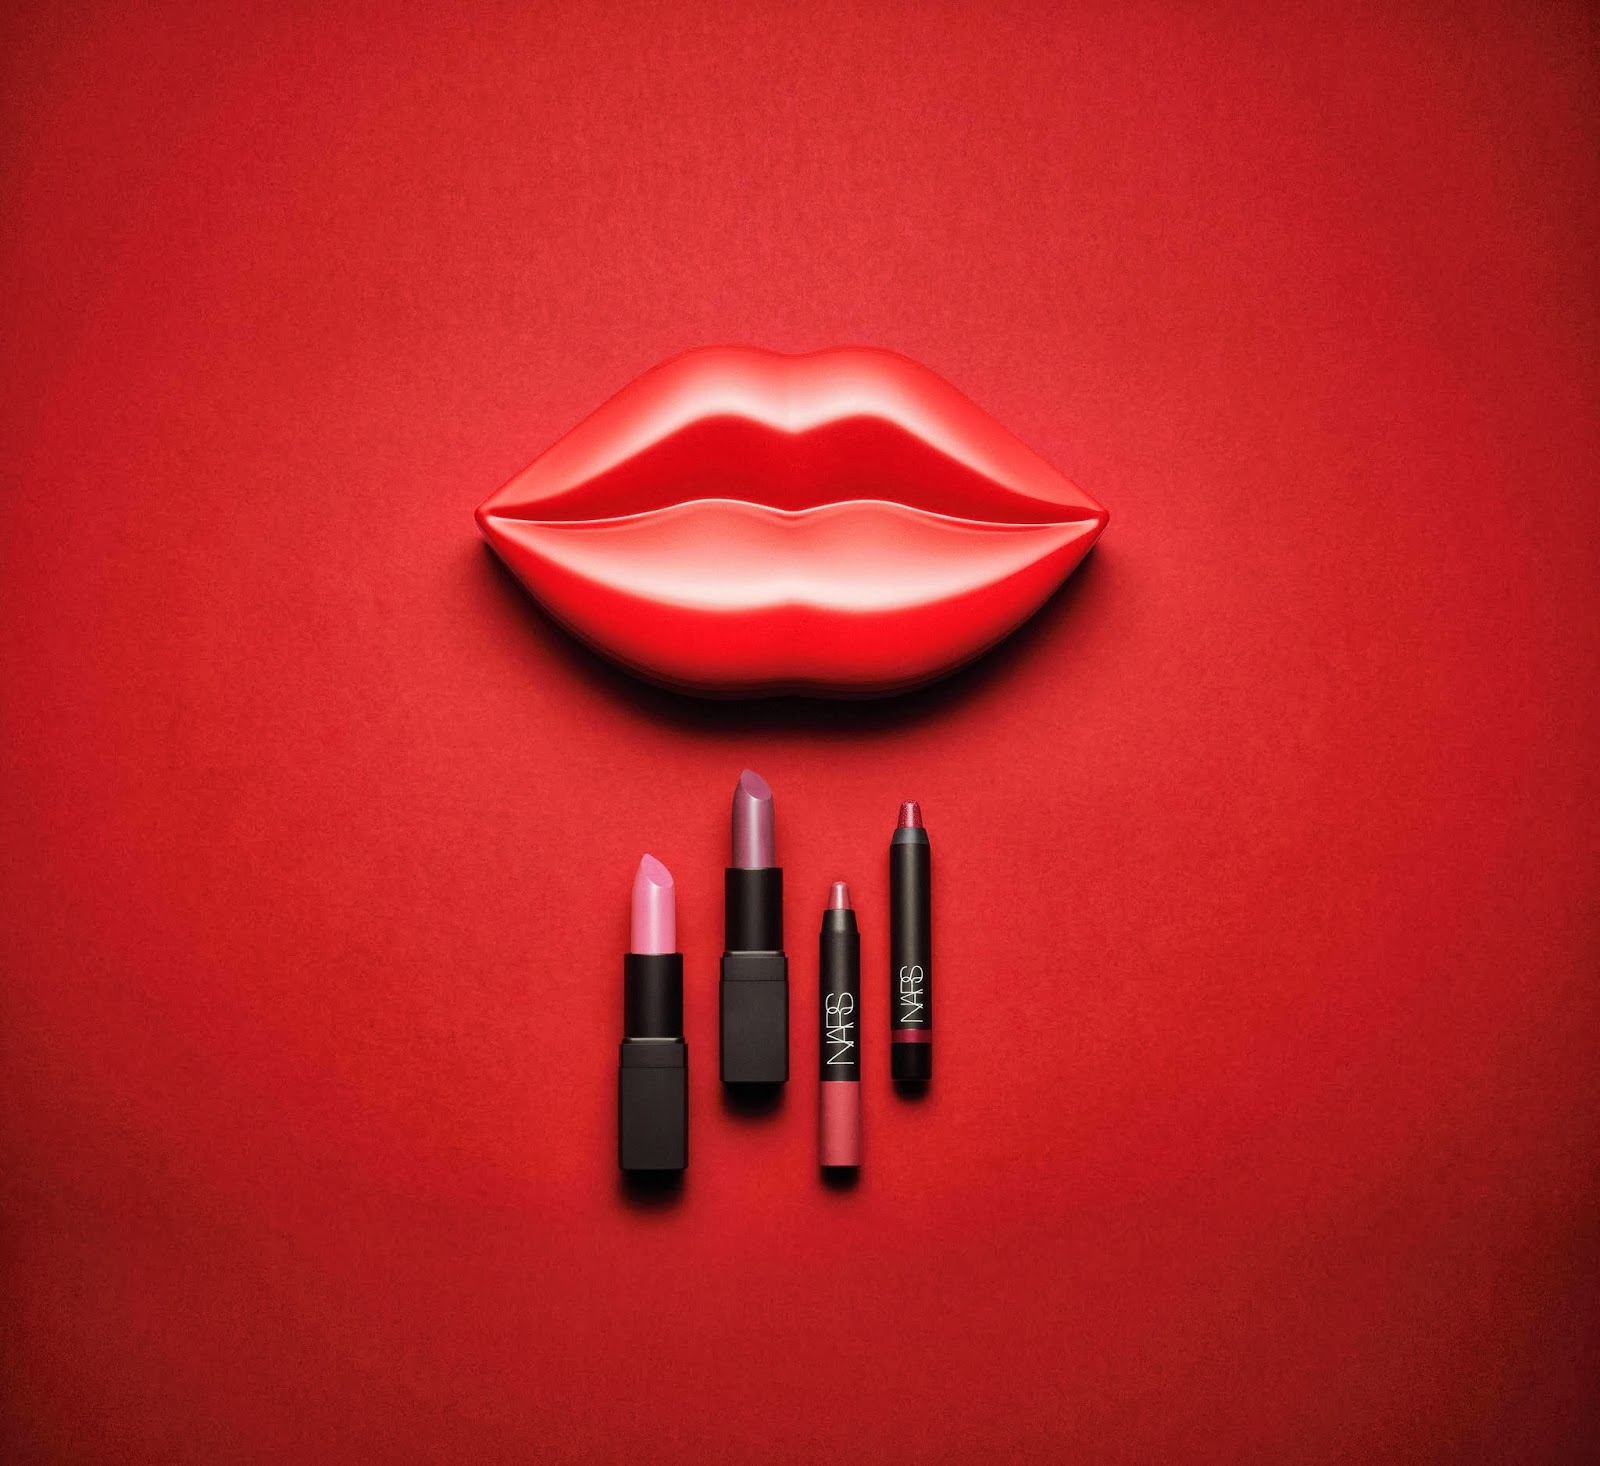 The Nars Guy Bourdin Collection | NUVO